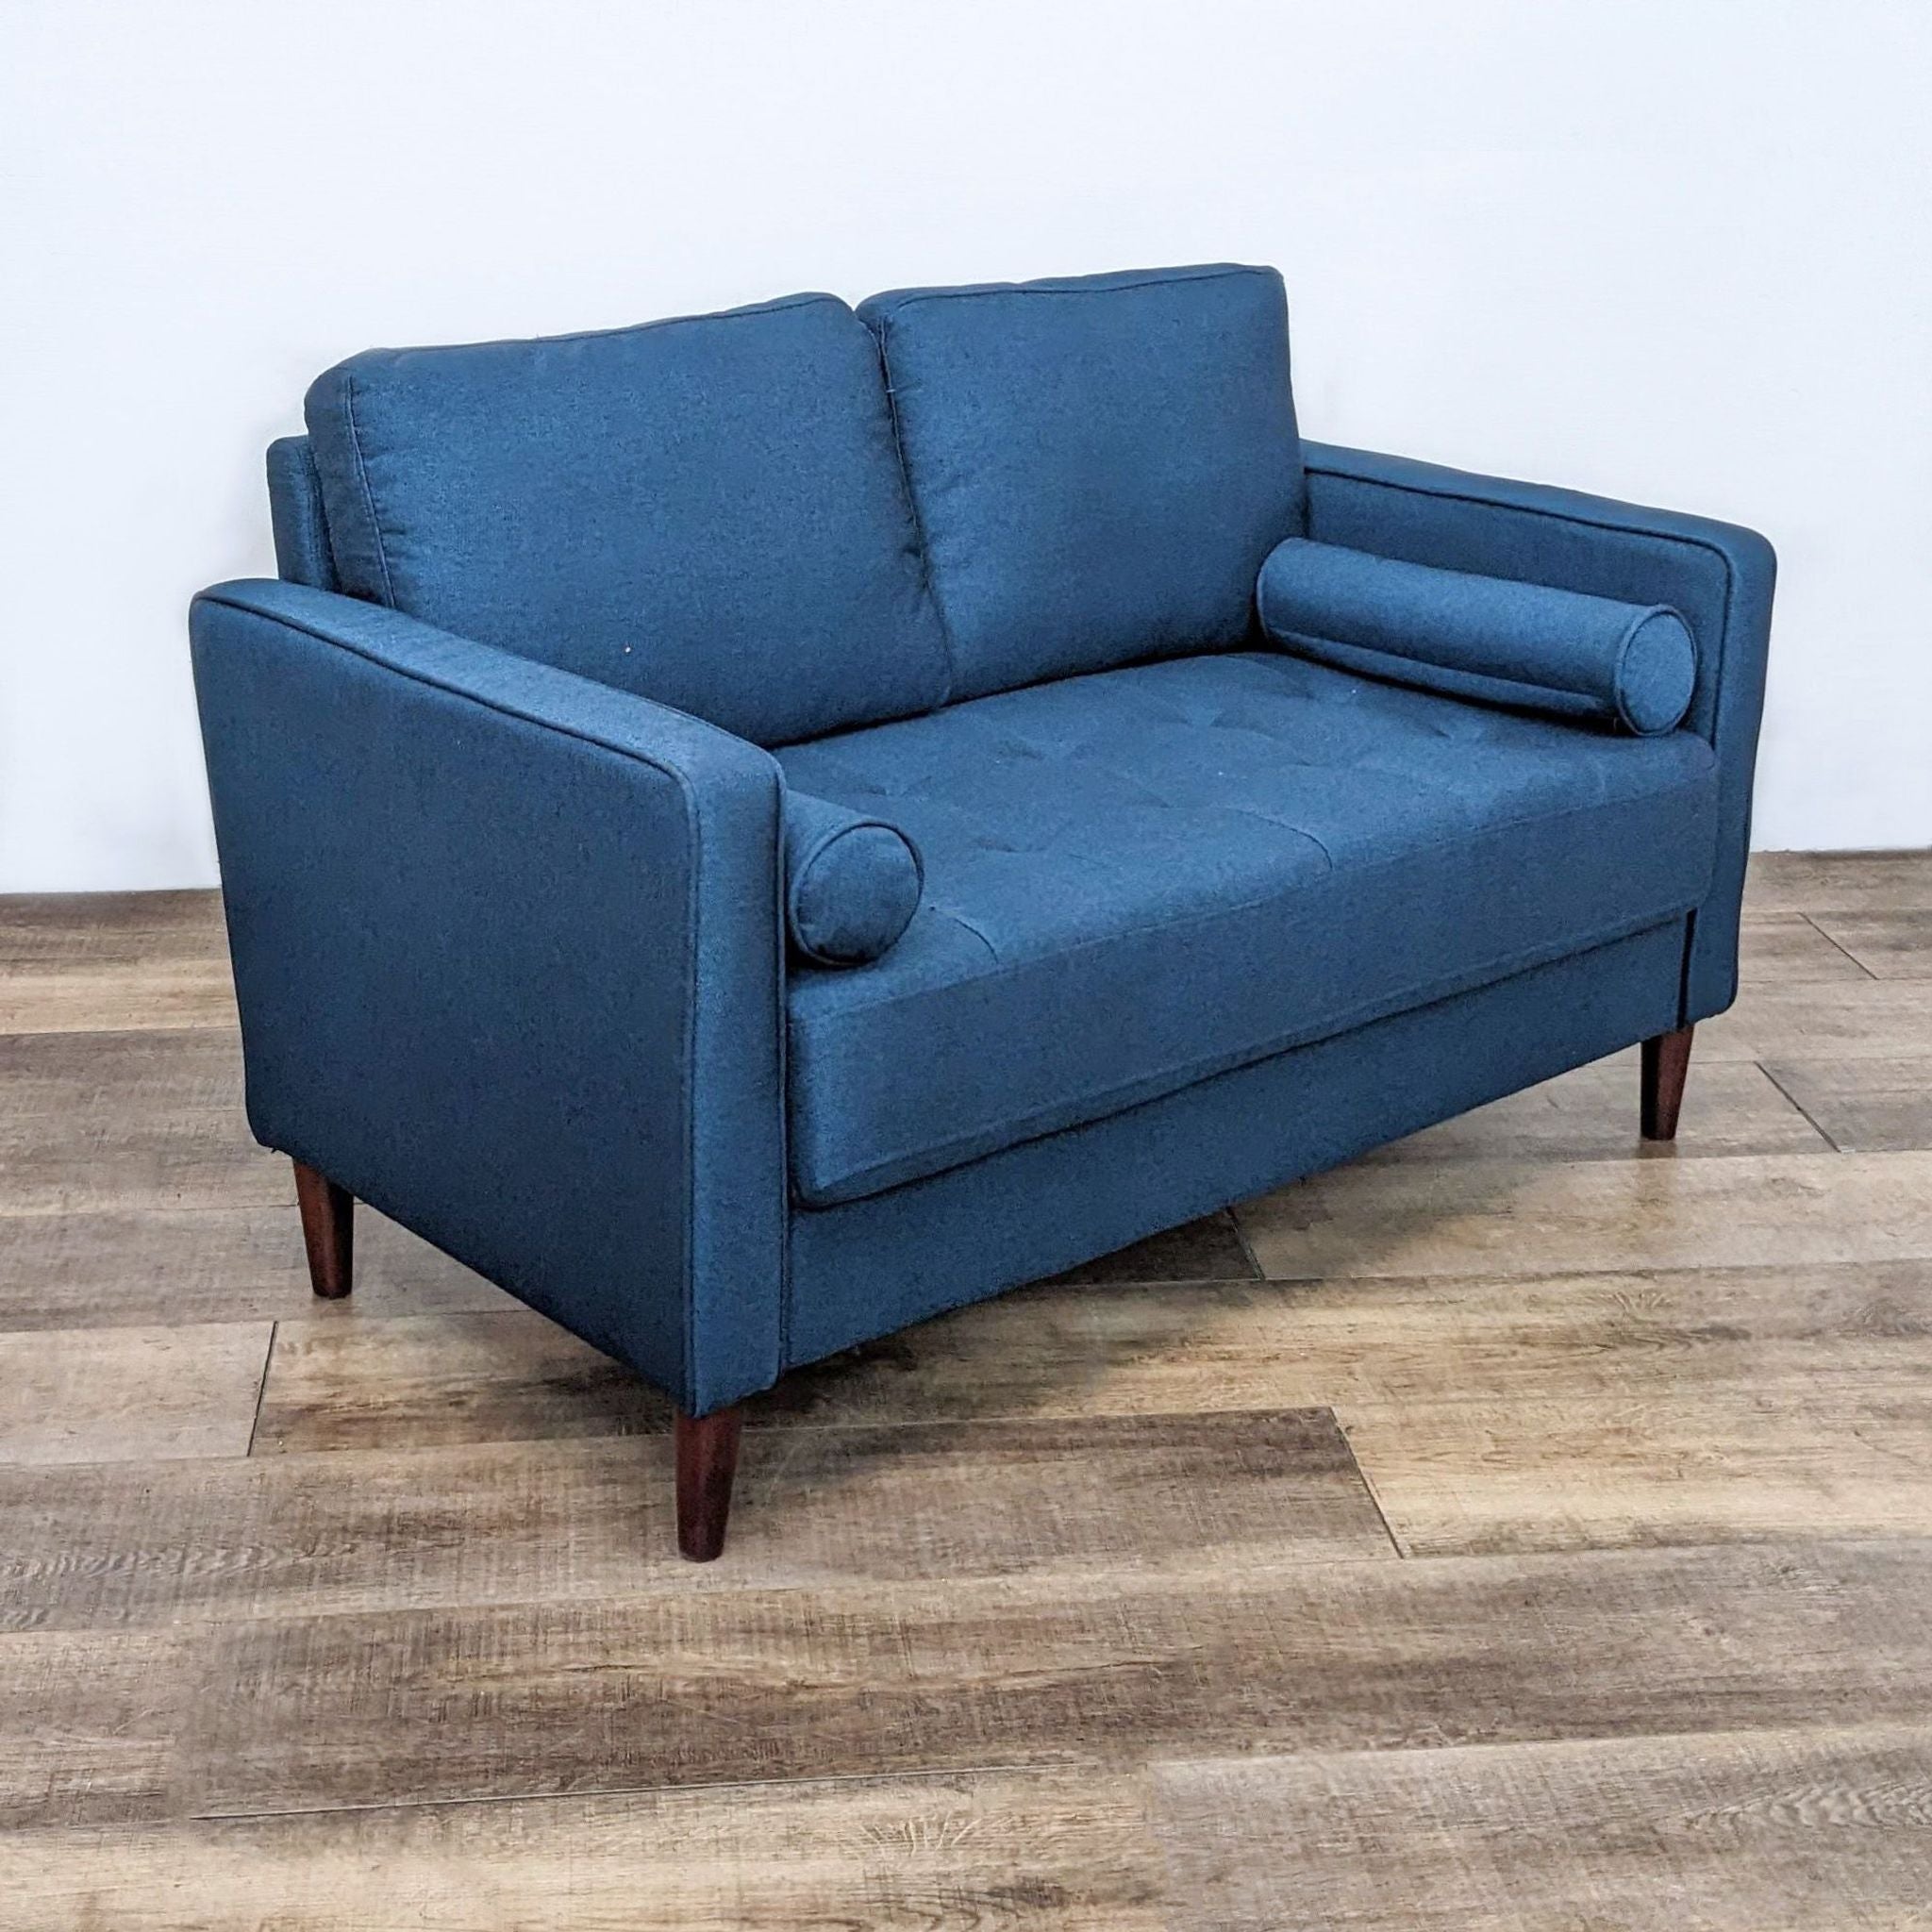 Alt text 2: Frontal view of a blue tufted loveseat with narrow arms and dark wooden feet, featuring Lifestyle Solutions tag.